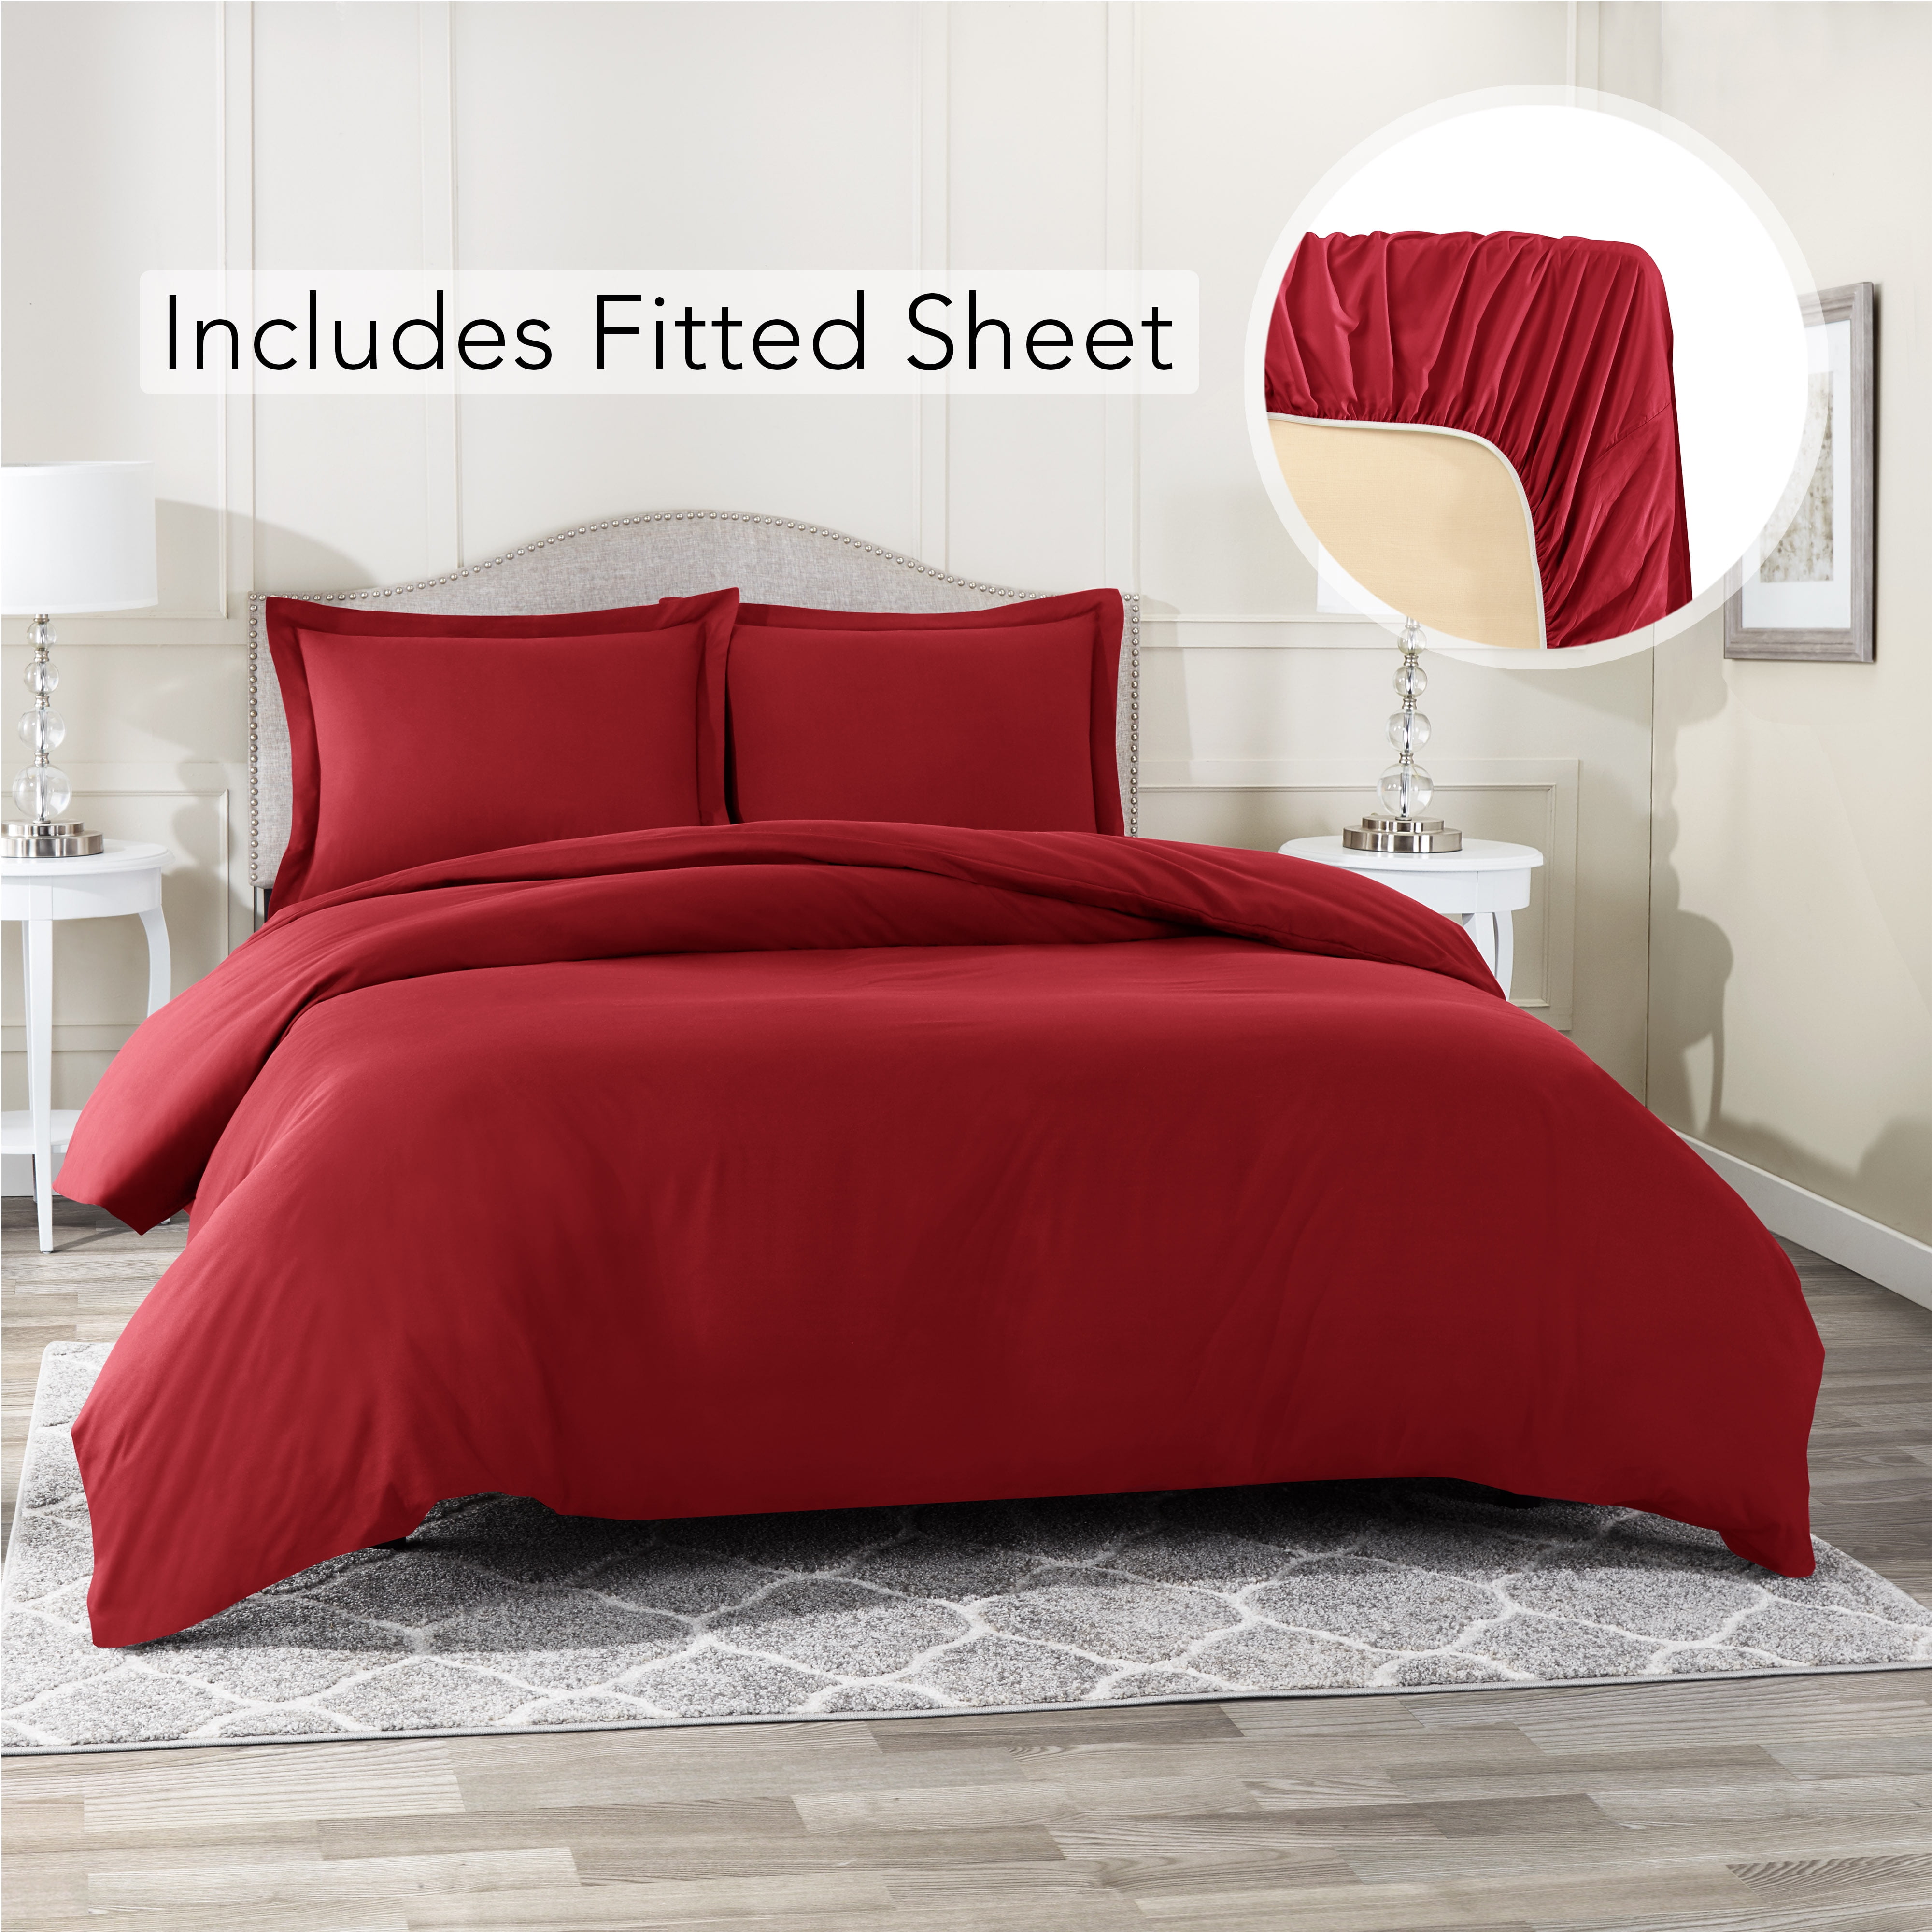 Details about   Seasonal Garden Fitted Sheet Cover with All-Round Elastic Pocket in 4 Sizes